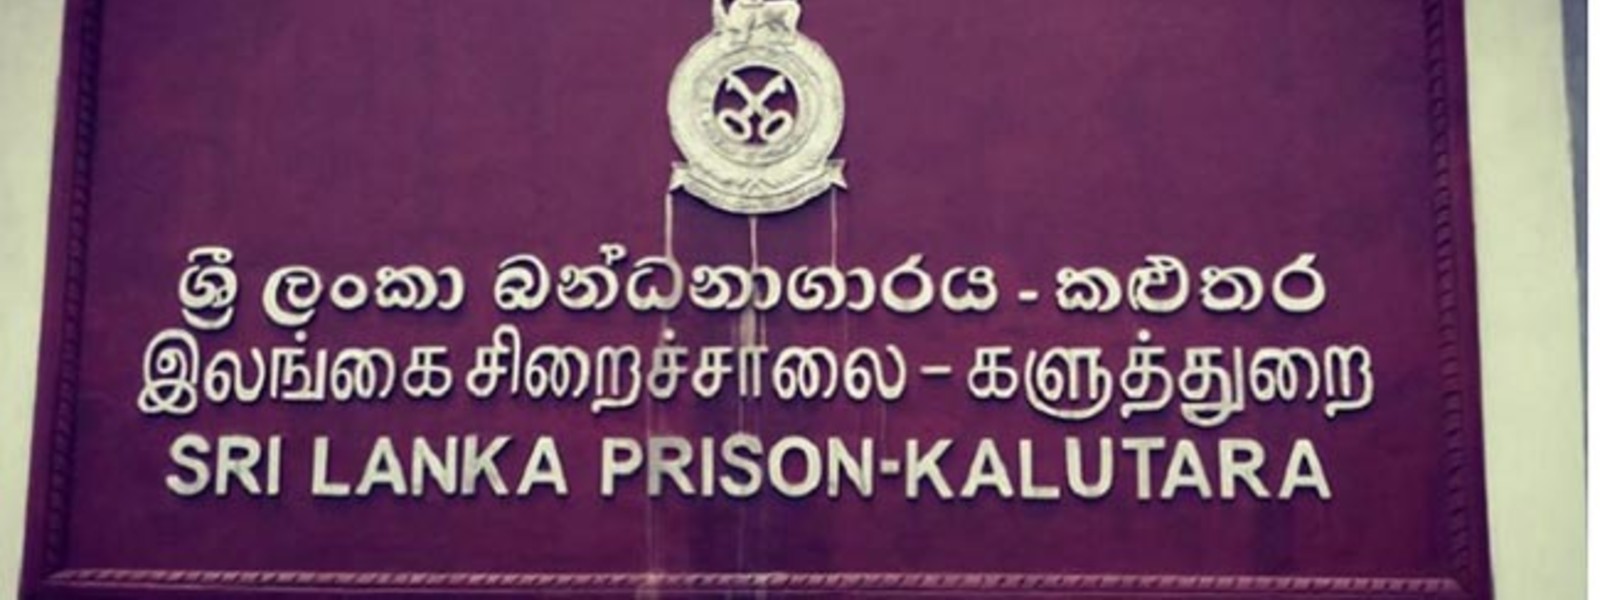 Parcel containing narcotics found outside Kalutara Prison